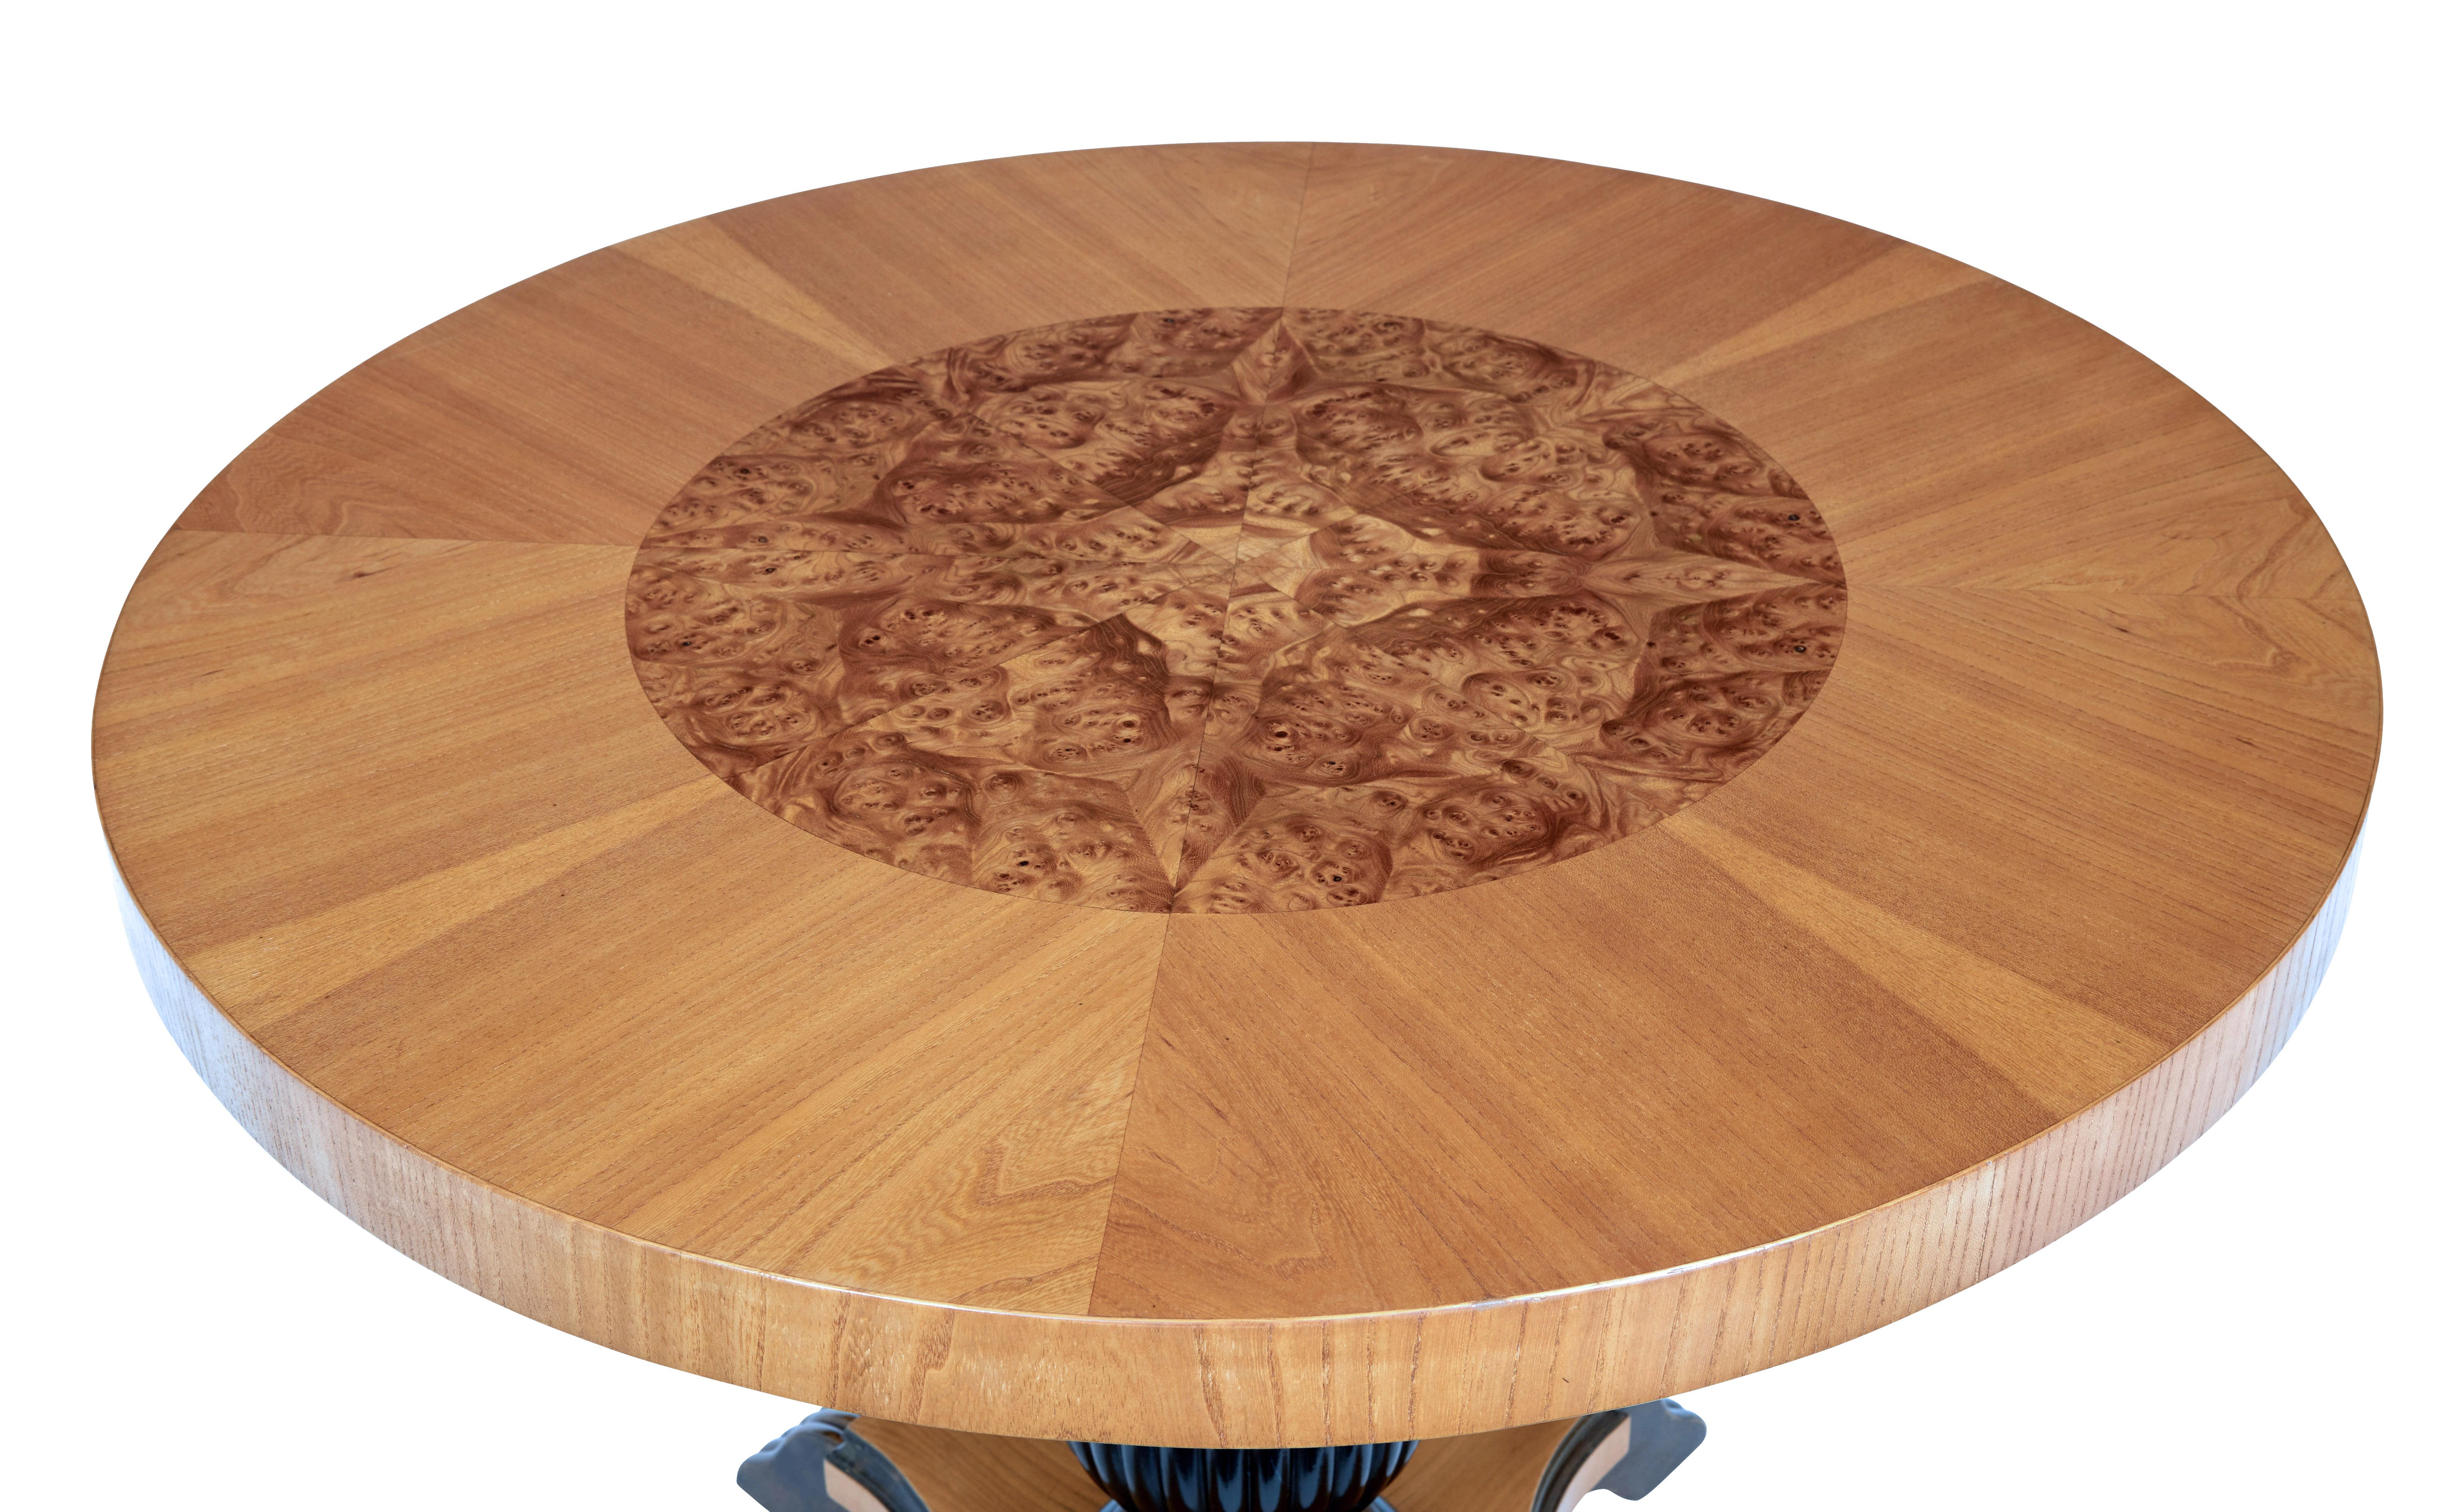 Mid 20th century art deco inspired elm coffee table circa 1950.

Good quality Swedish round coffee table, featuring and inner circle of segmented burr elm surrounded by elm on the outer side. Supported by an ebonised turned and fluted column and